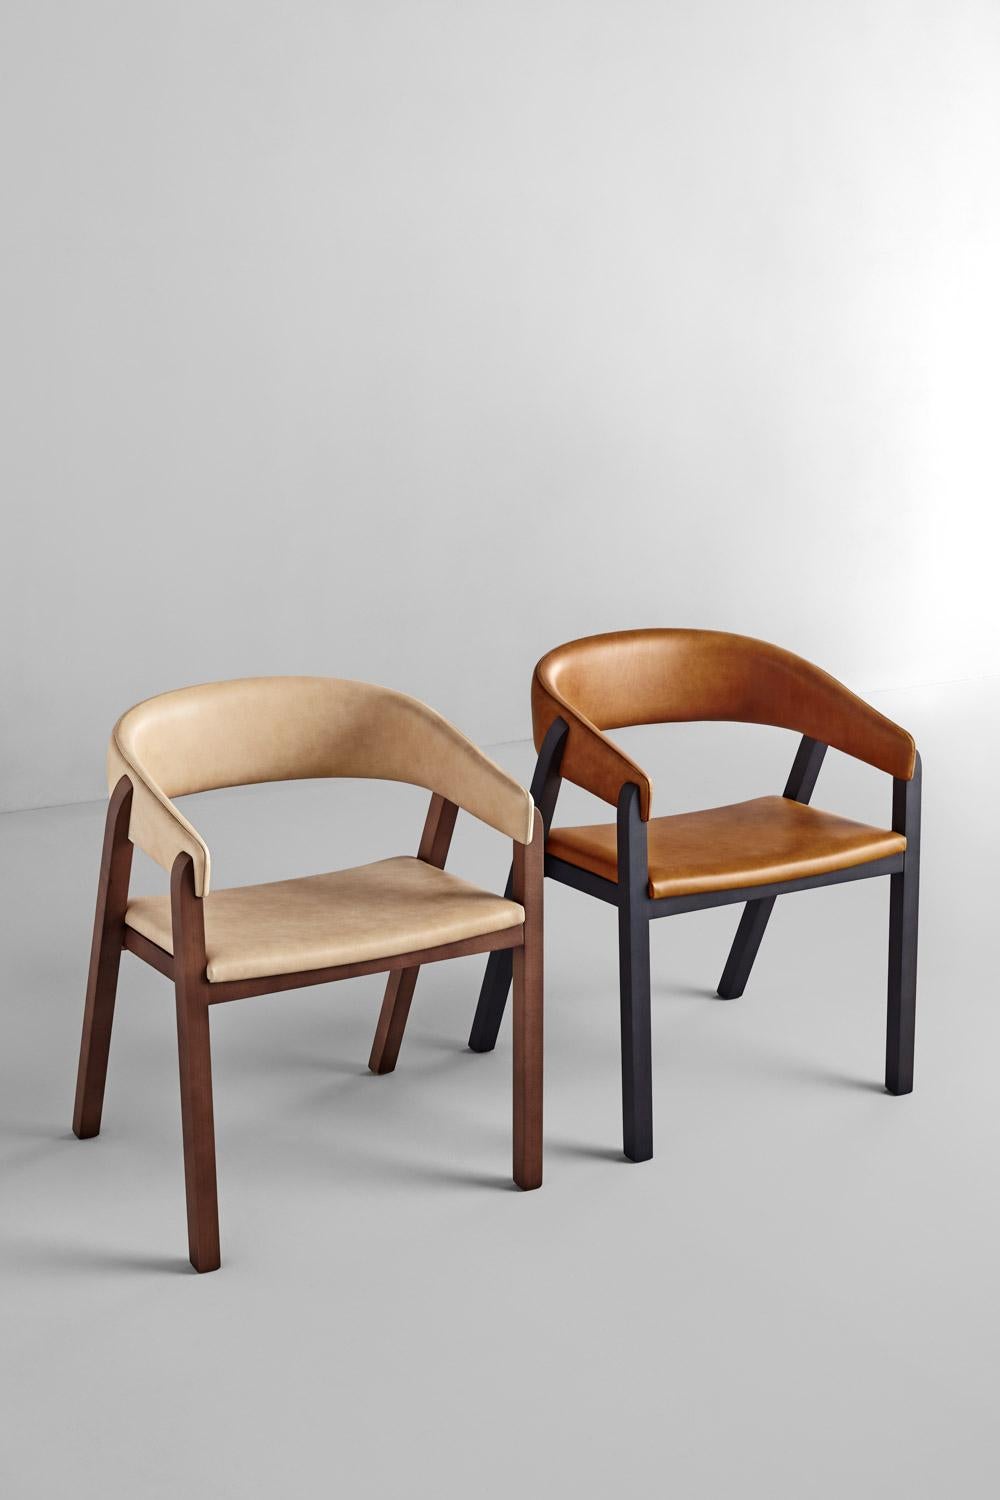 Set of 4 Oslo chairs, brown by Pepe Albargues
Dimensions: W 59, D 50, H 75, seat 46
Materials: Beech wood structure
Foam CMHR (high resilience and flame retardant) for all our cushion filling systems

Also available: Variations of materials and